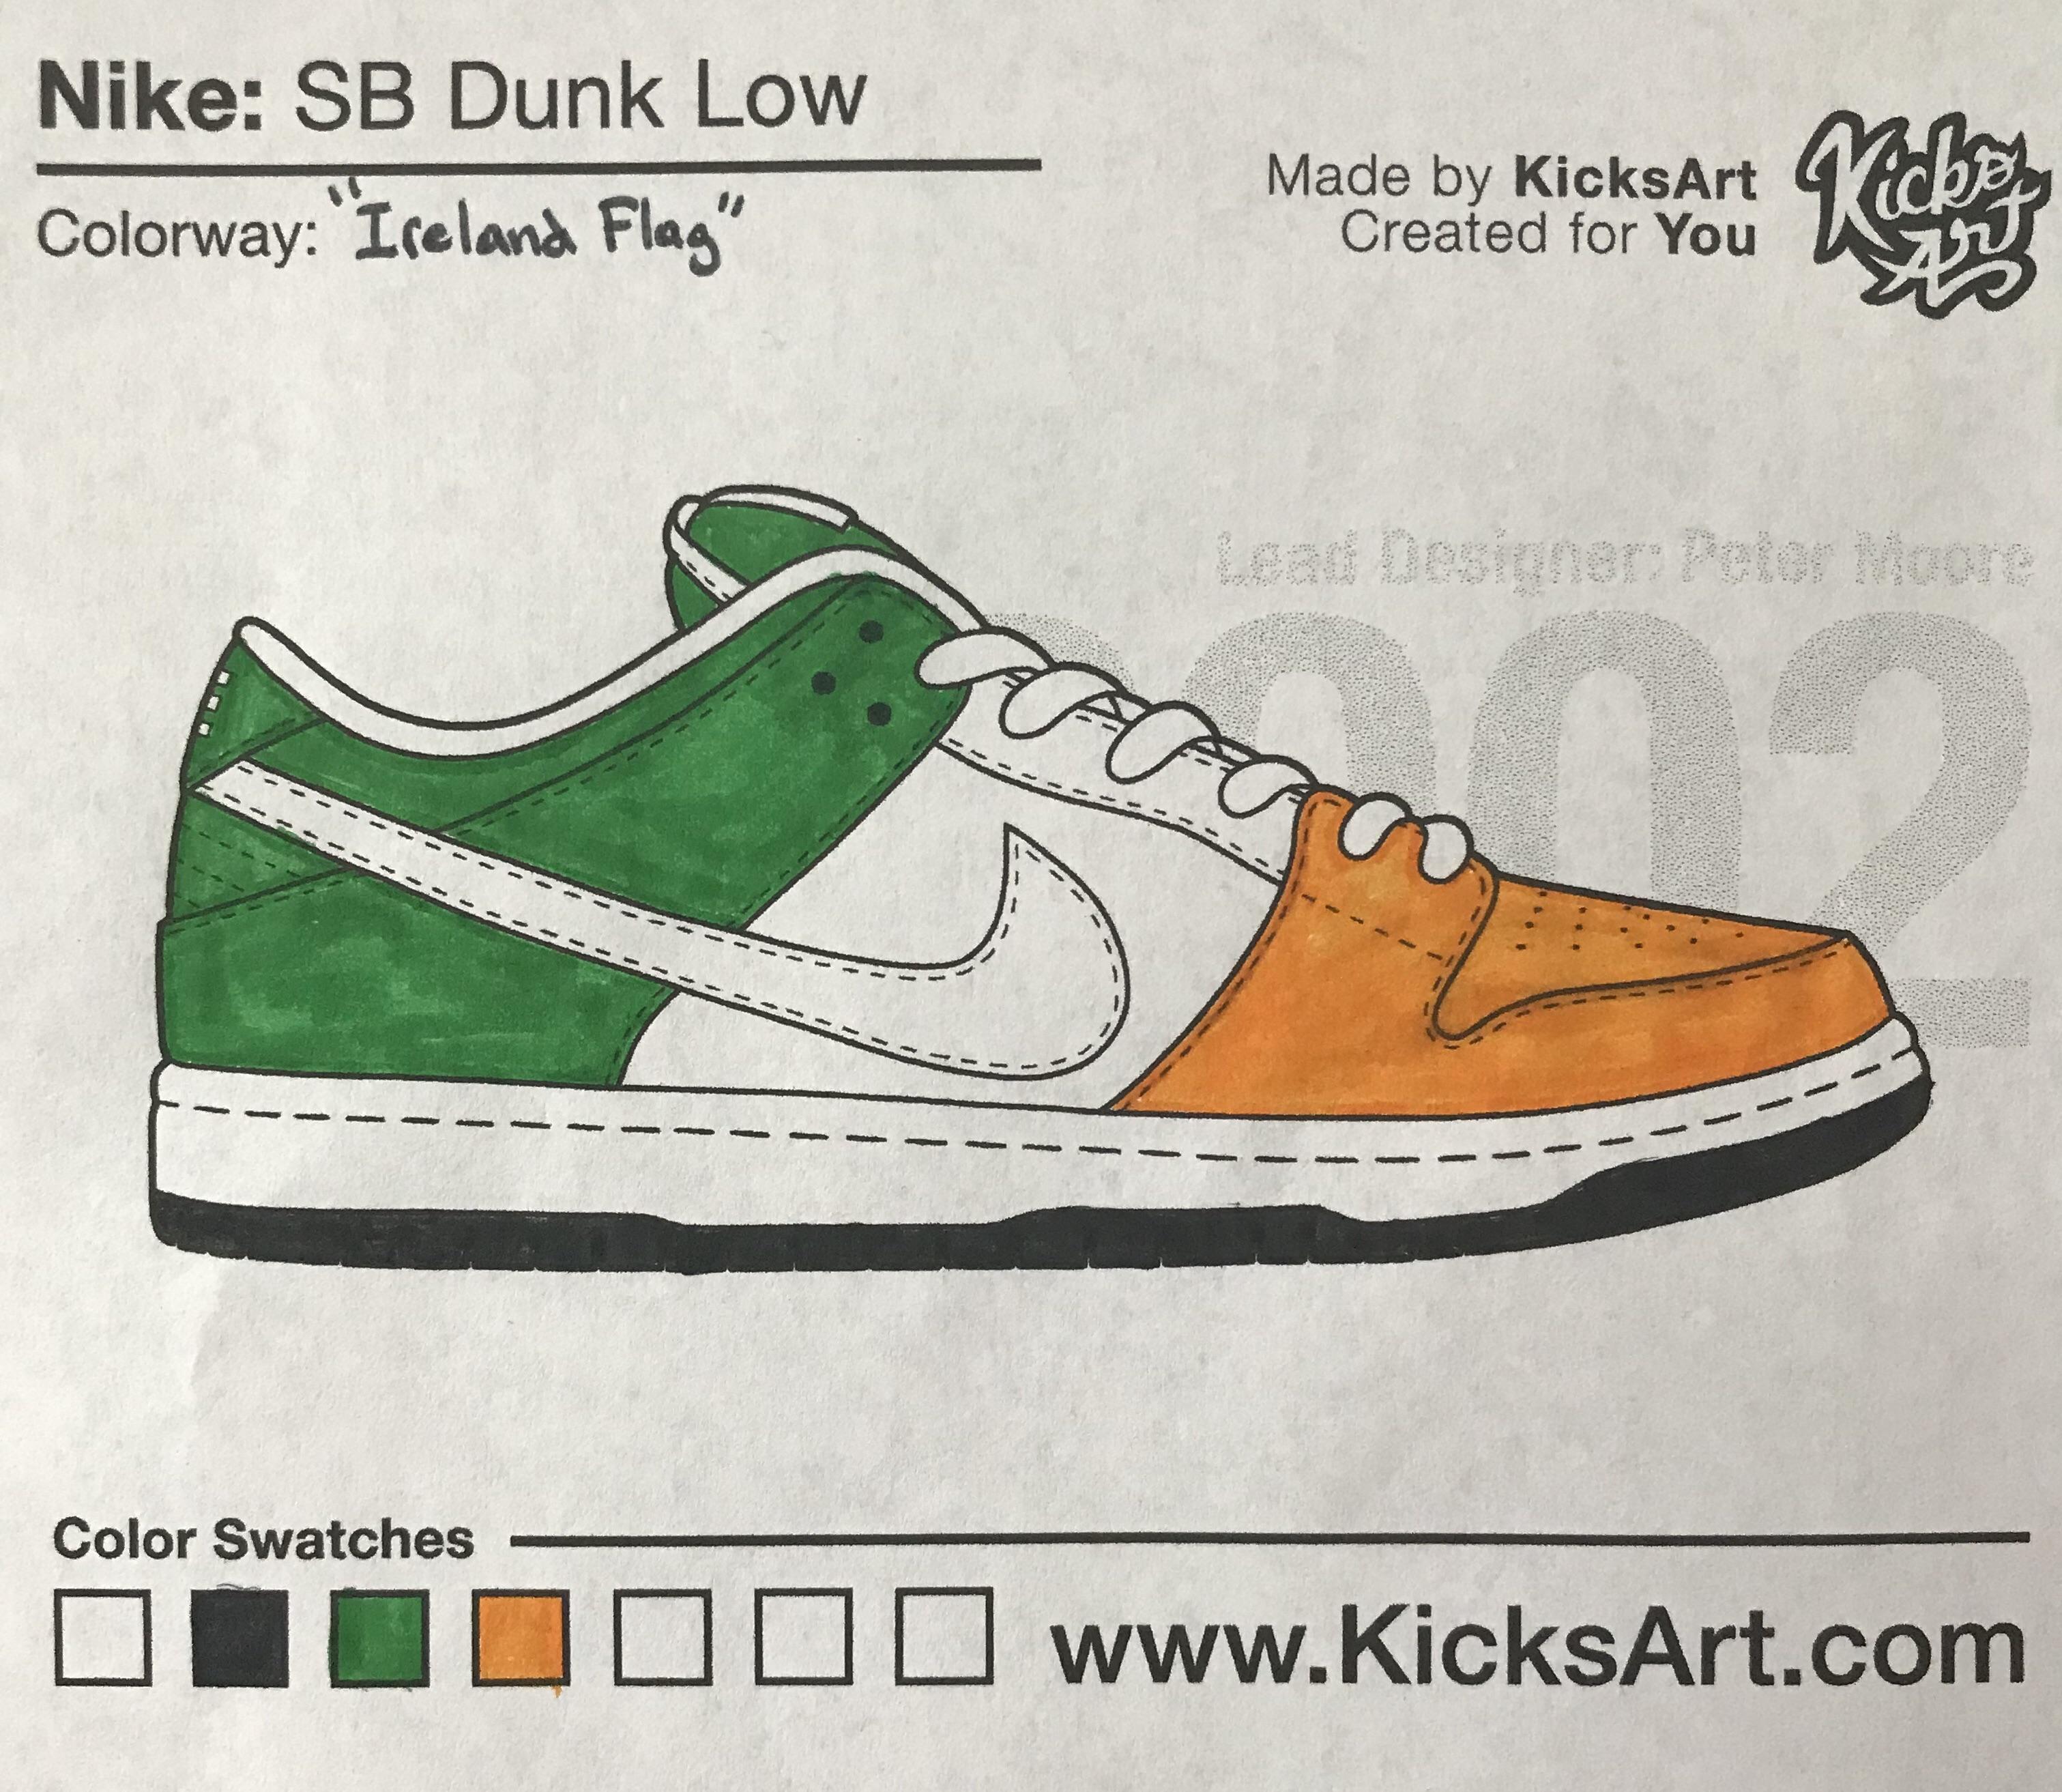 I colored in a kicksart coloring page dunk what do you think rsneakers